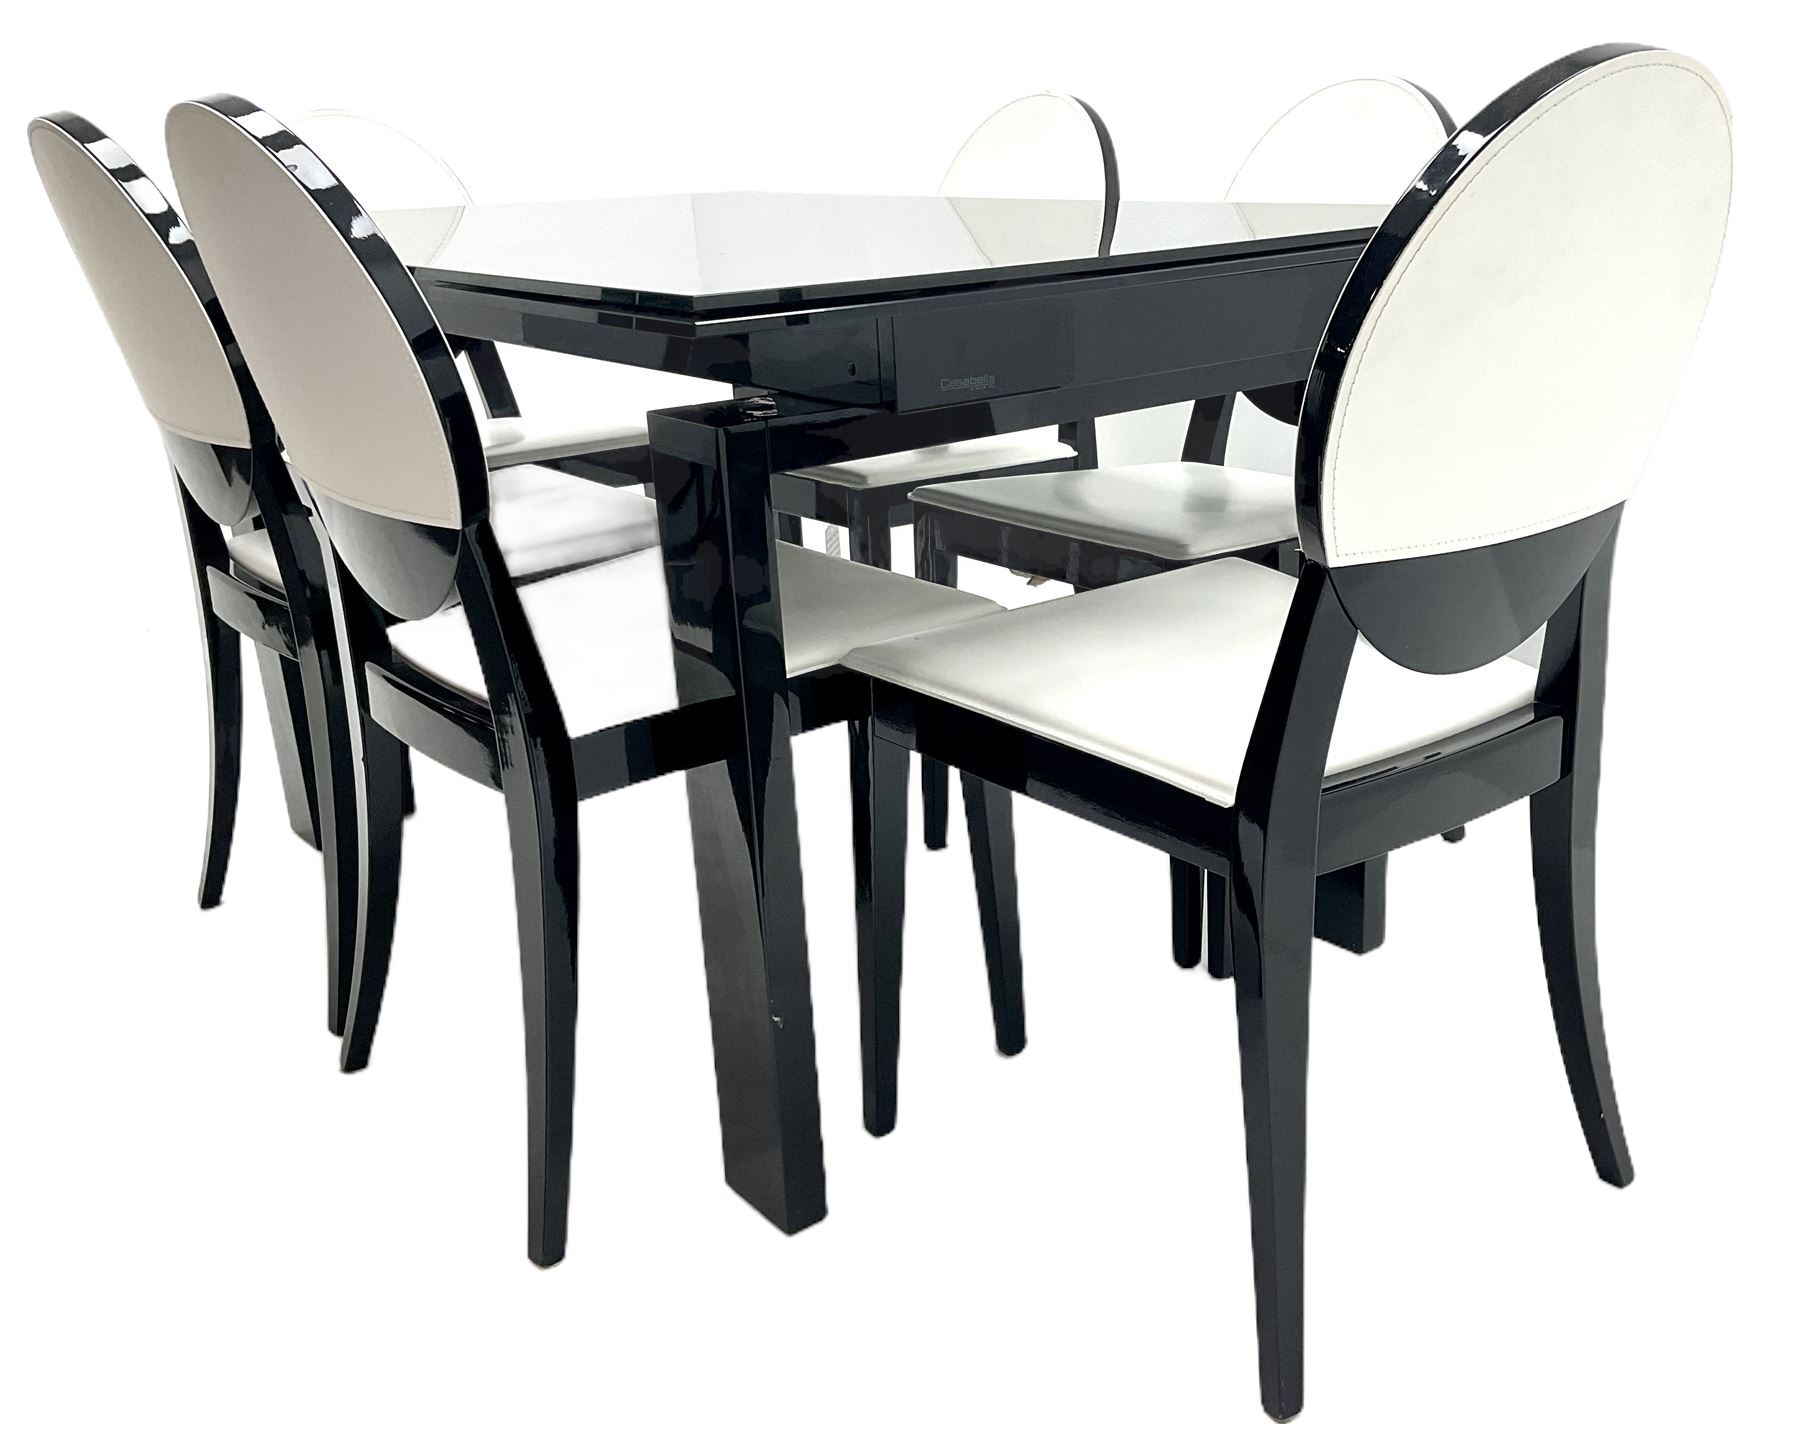 Casabella Dolce Vita black gloss and glass extending dining table - Image 5 of 6